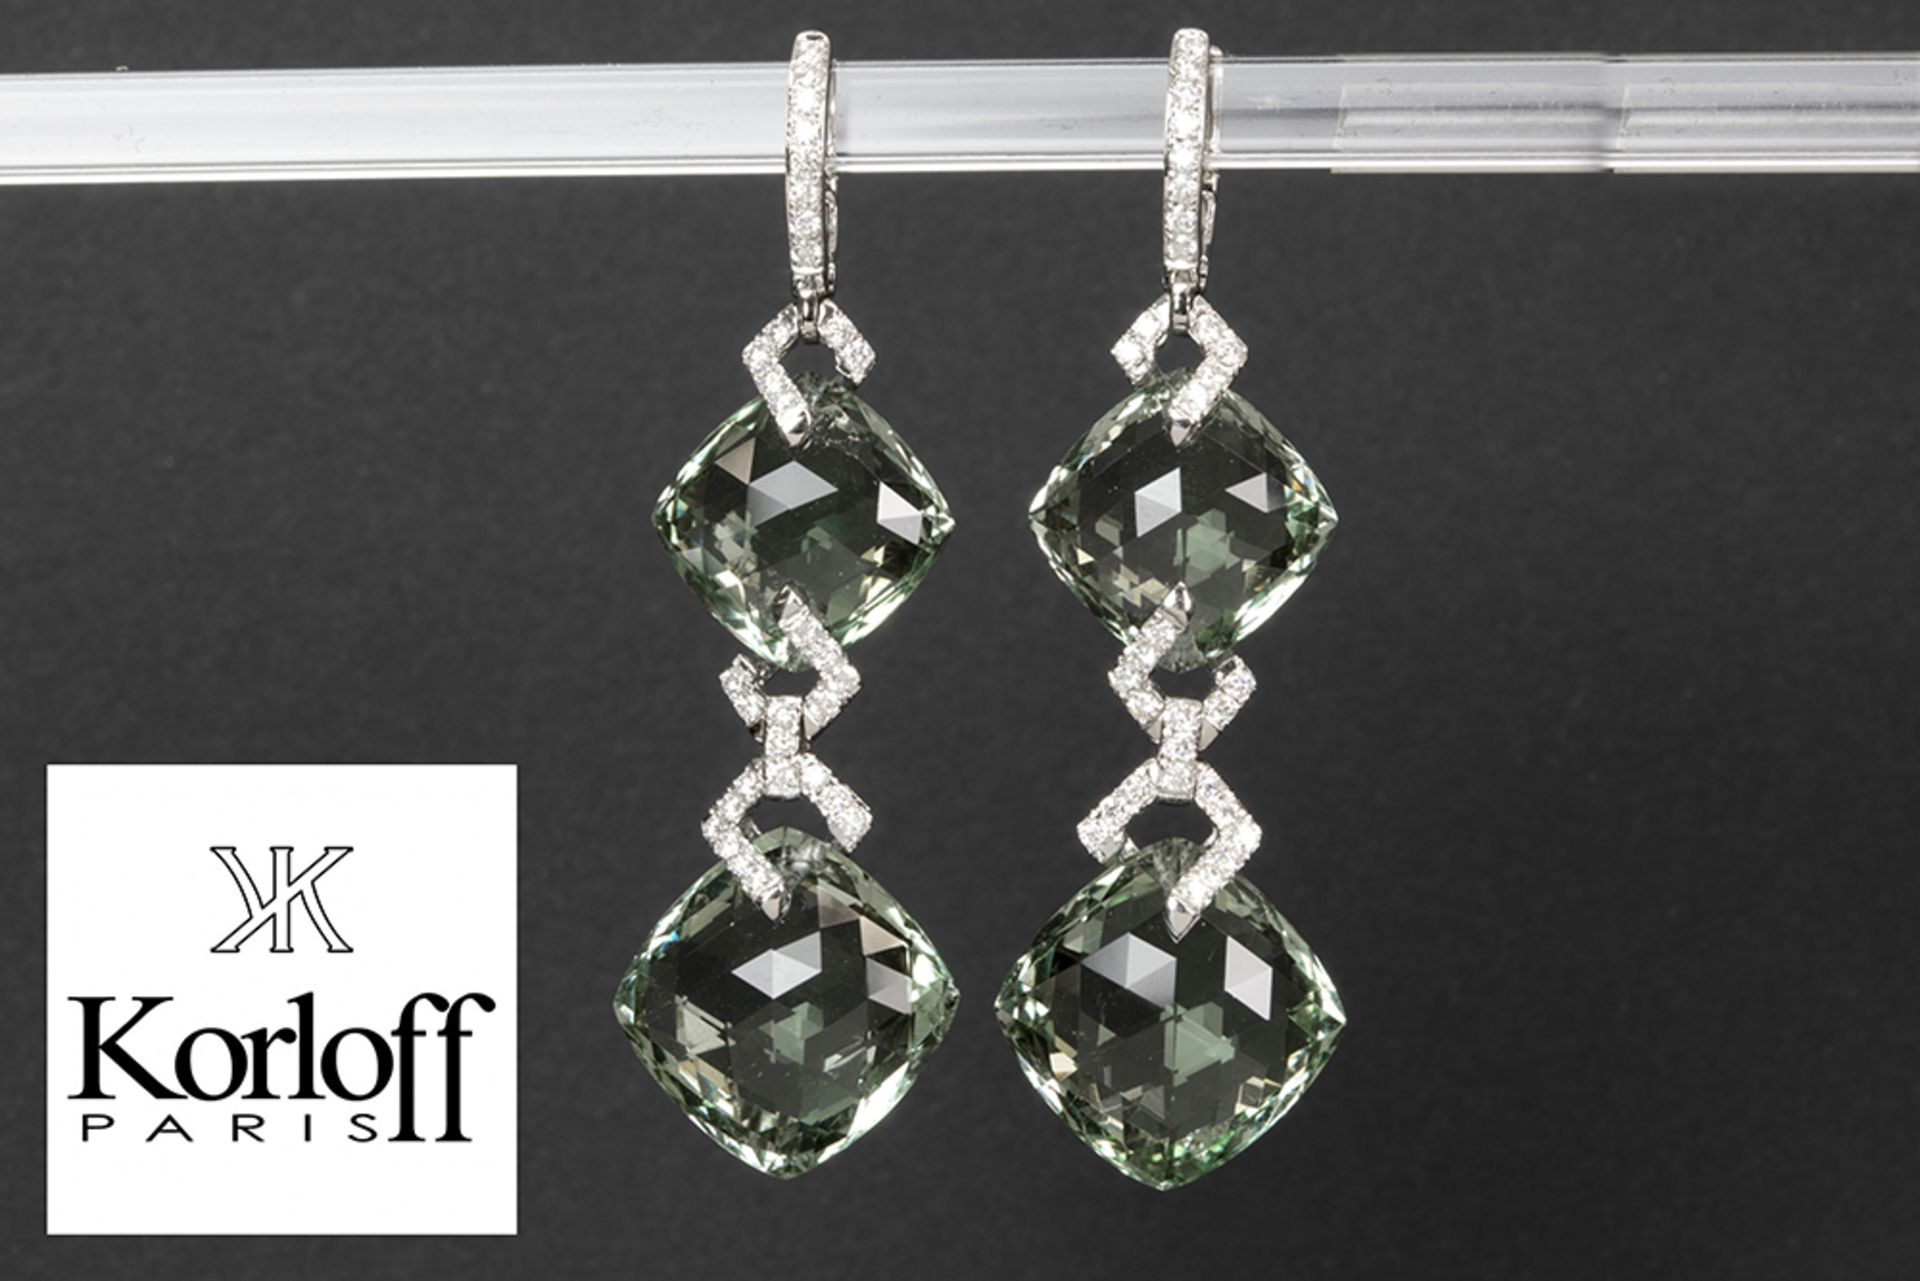 pair of Korloff signed earrings with ca 25 carat of green turmaline set in white gold (18 carat)